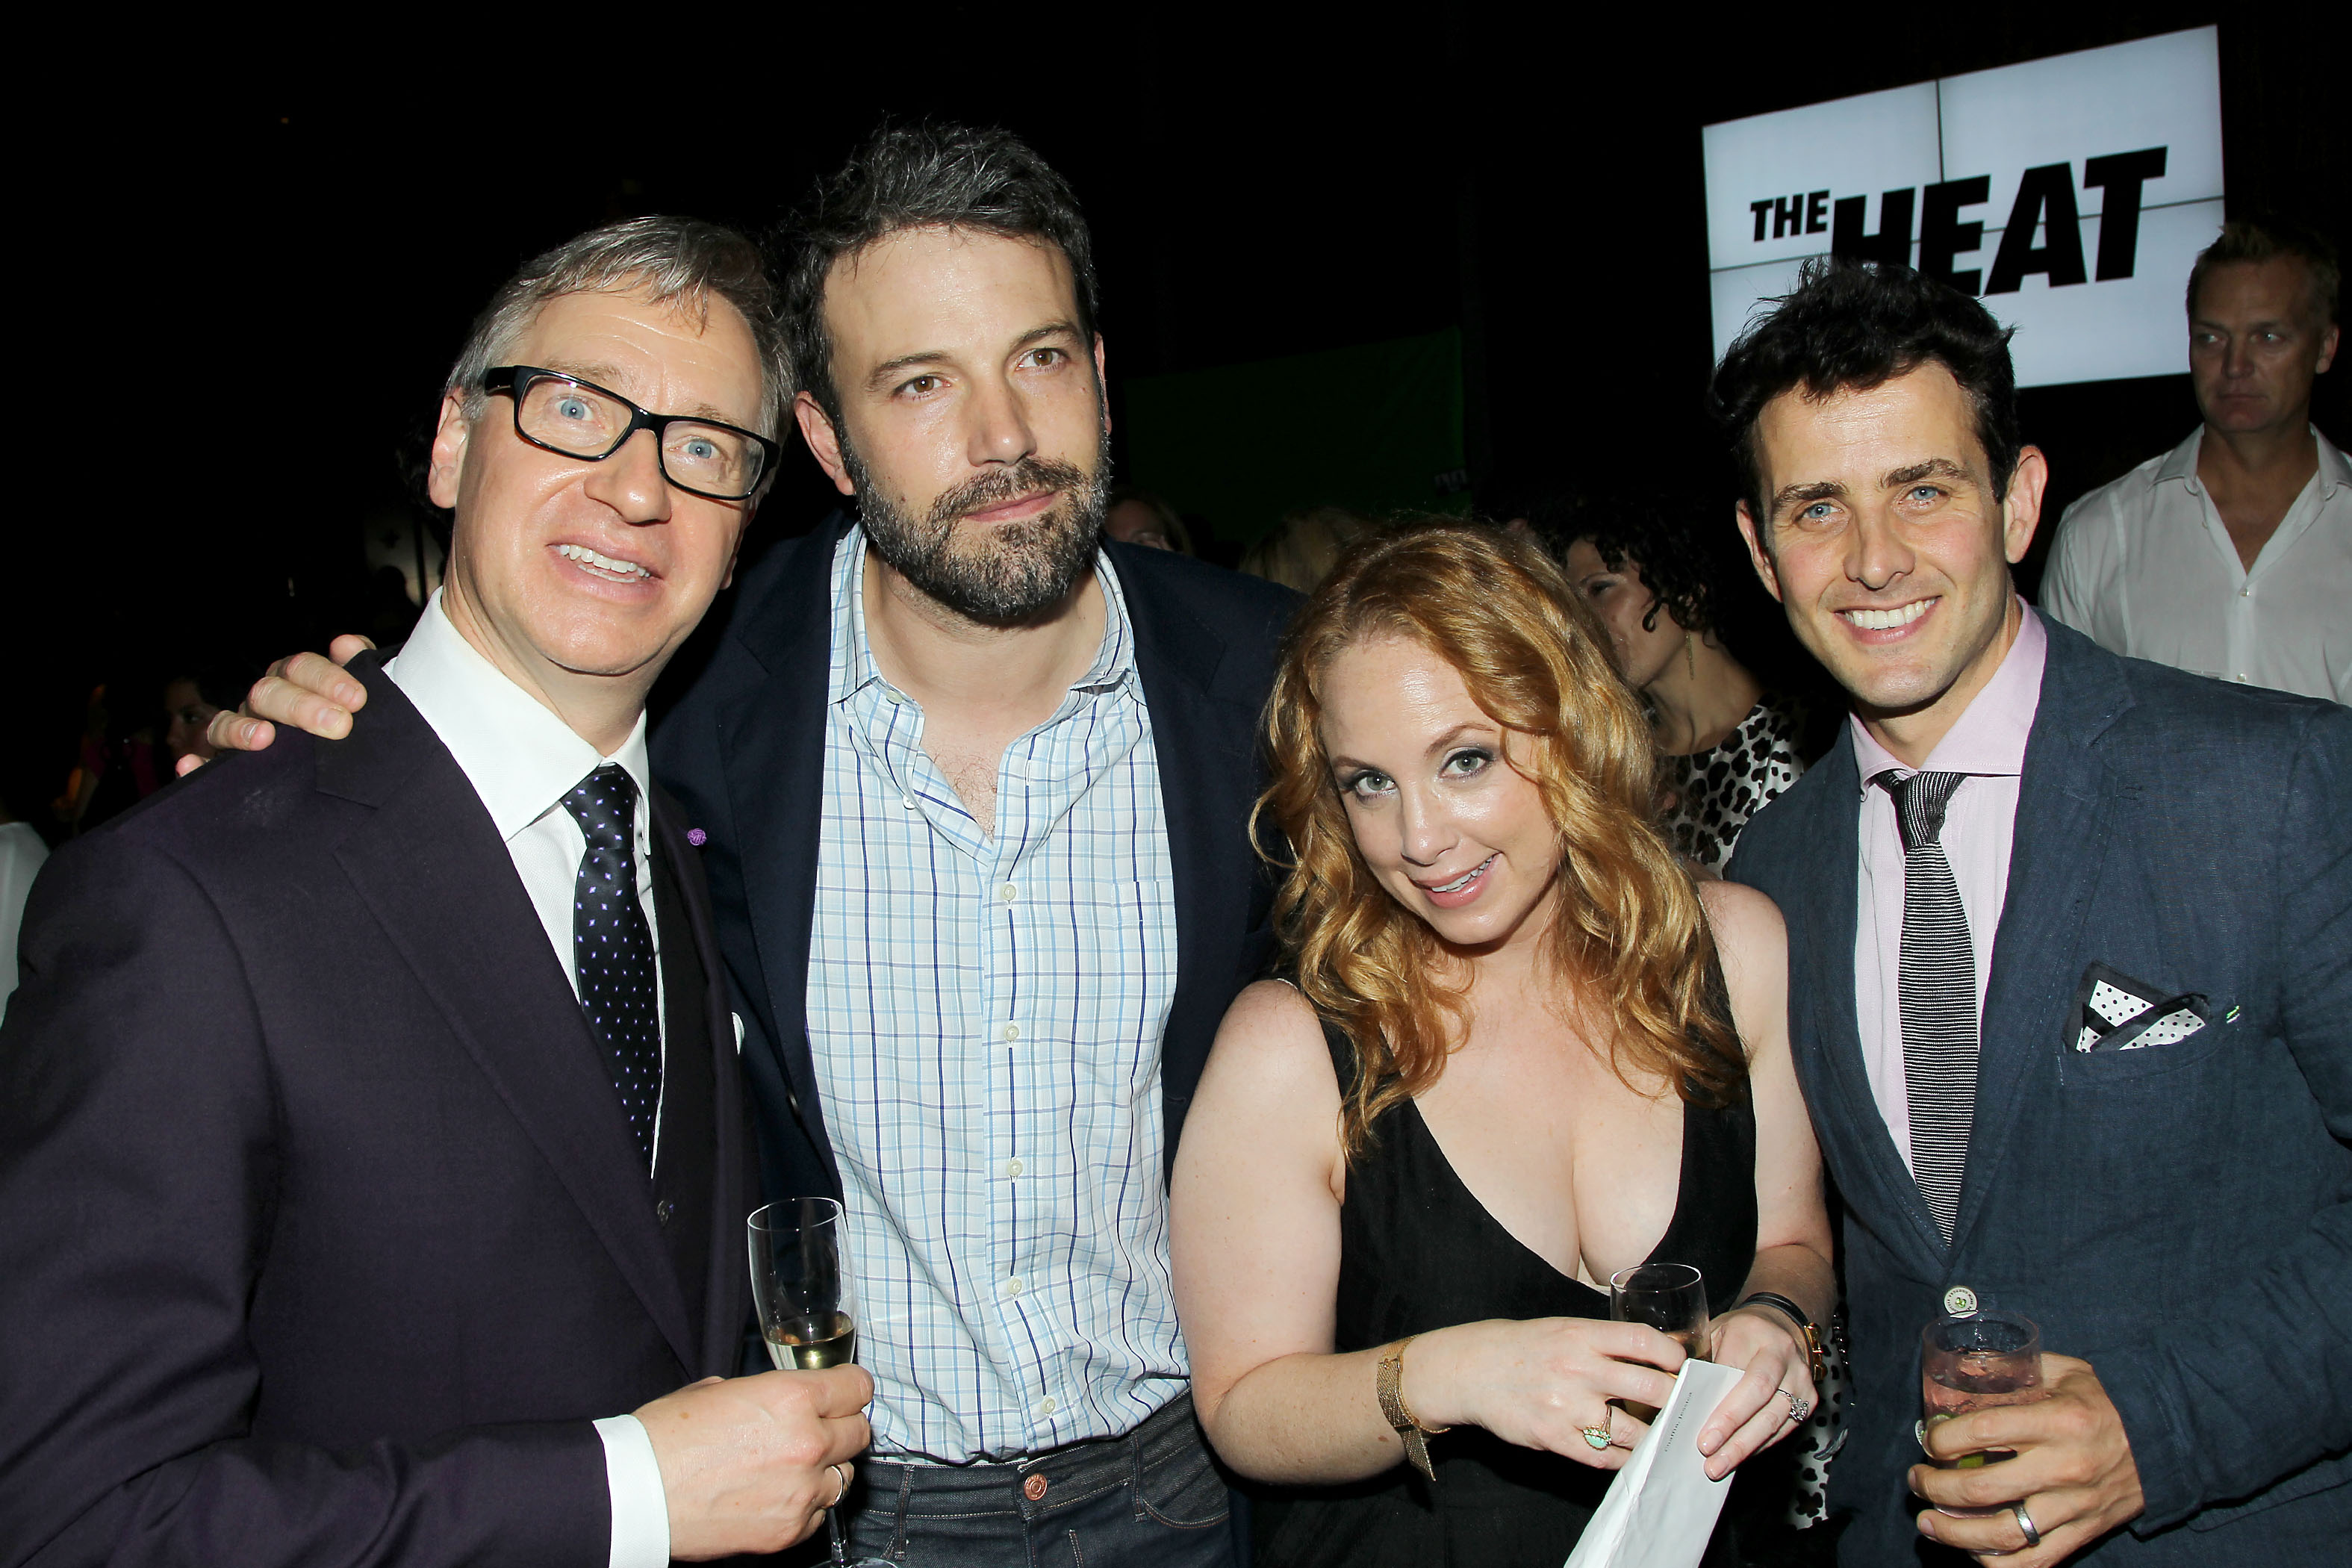 Paul Feig (Director), Ben Affleck, Jessica Chaffin, Joey McIntyre - 20th Century Fox Presents the New York Premiere After Party for "THE HEAT", Hosted by C. Wonder at Stone Rose Lounge - photo by startraksphoto.com